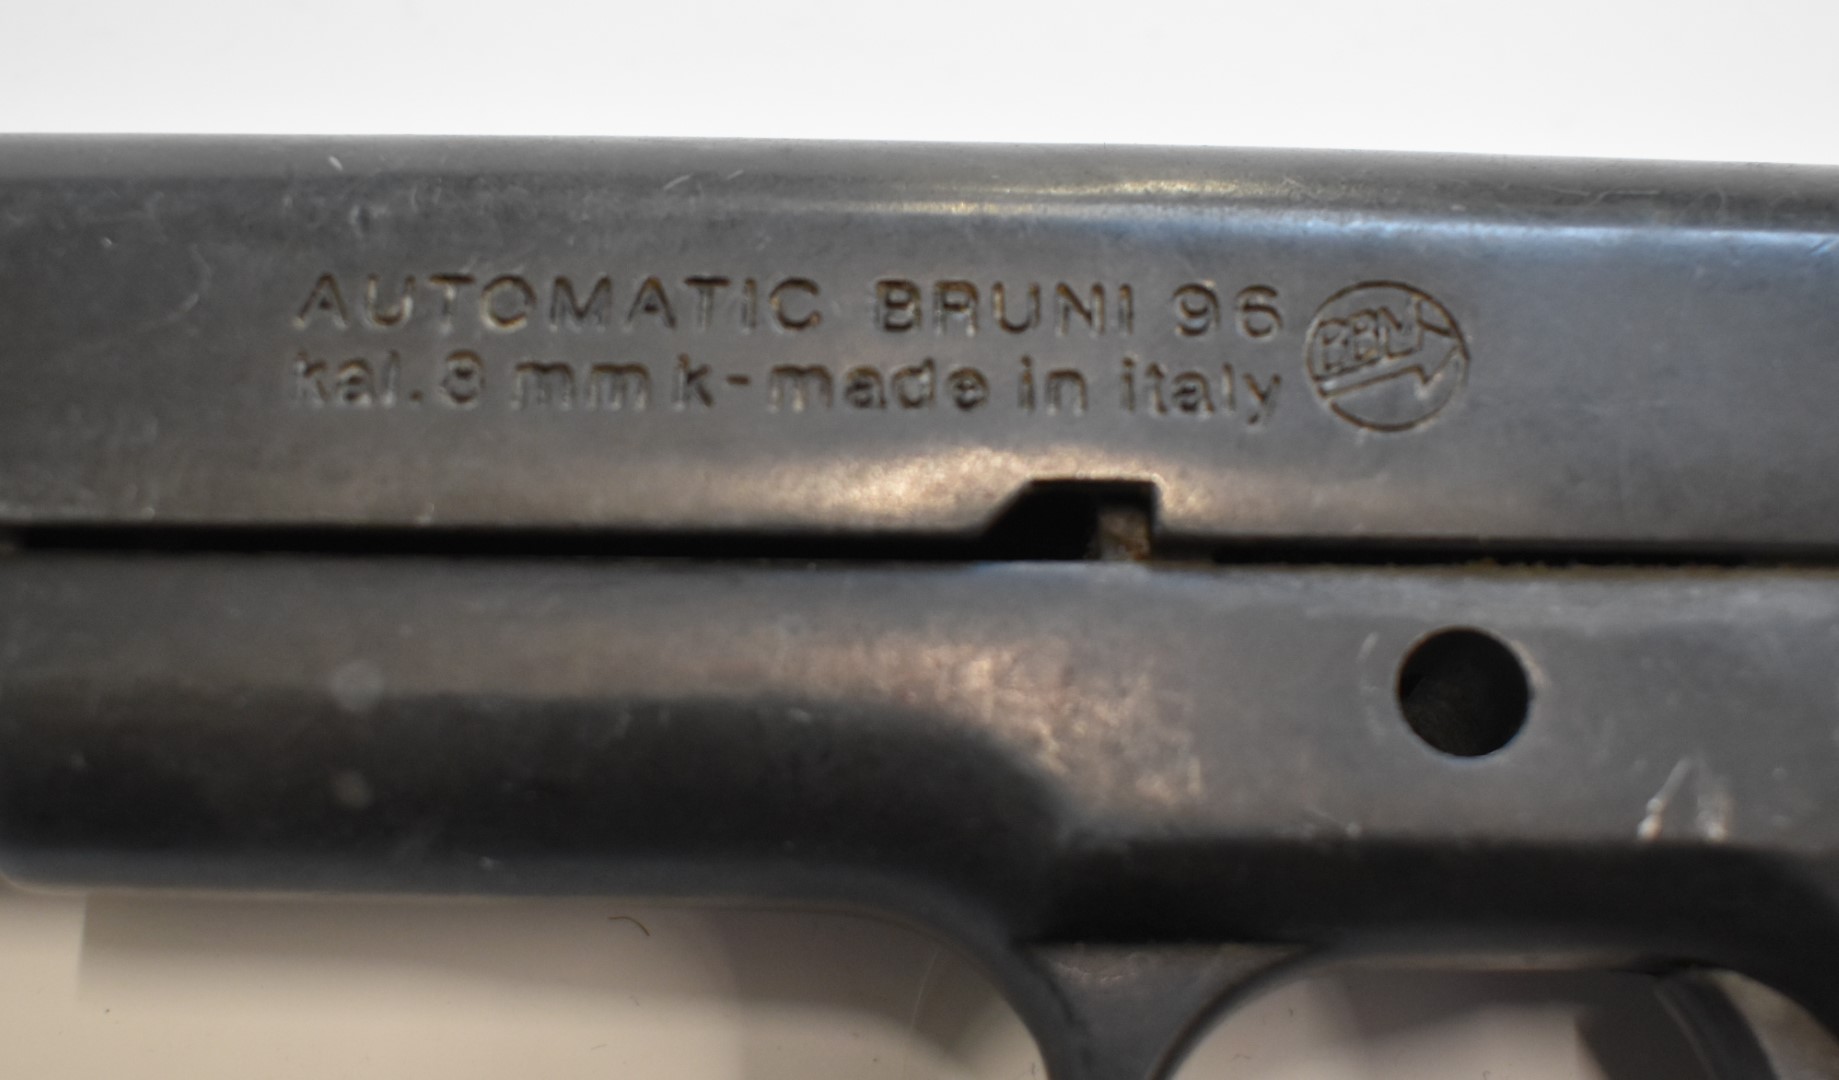 BBM Bruni 96 Automatic 8mm blank firing pistol with wooden grips and a spare magazine. - Image 3 of 4